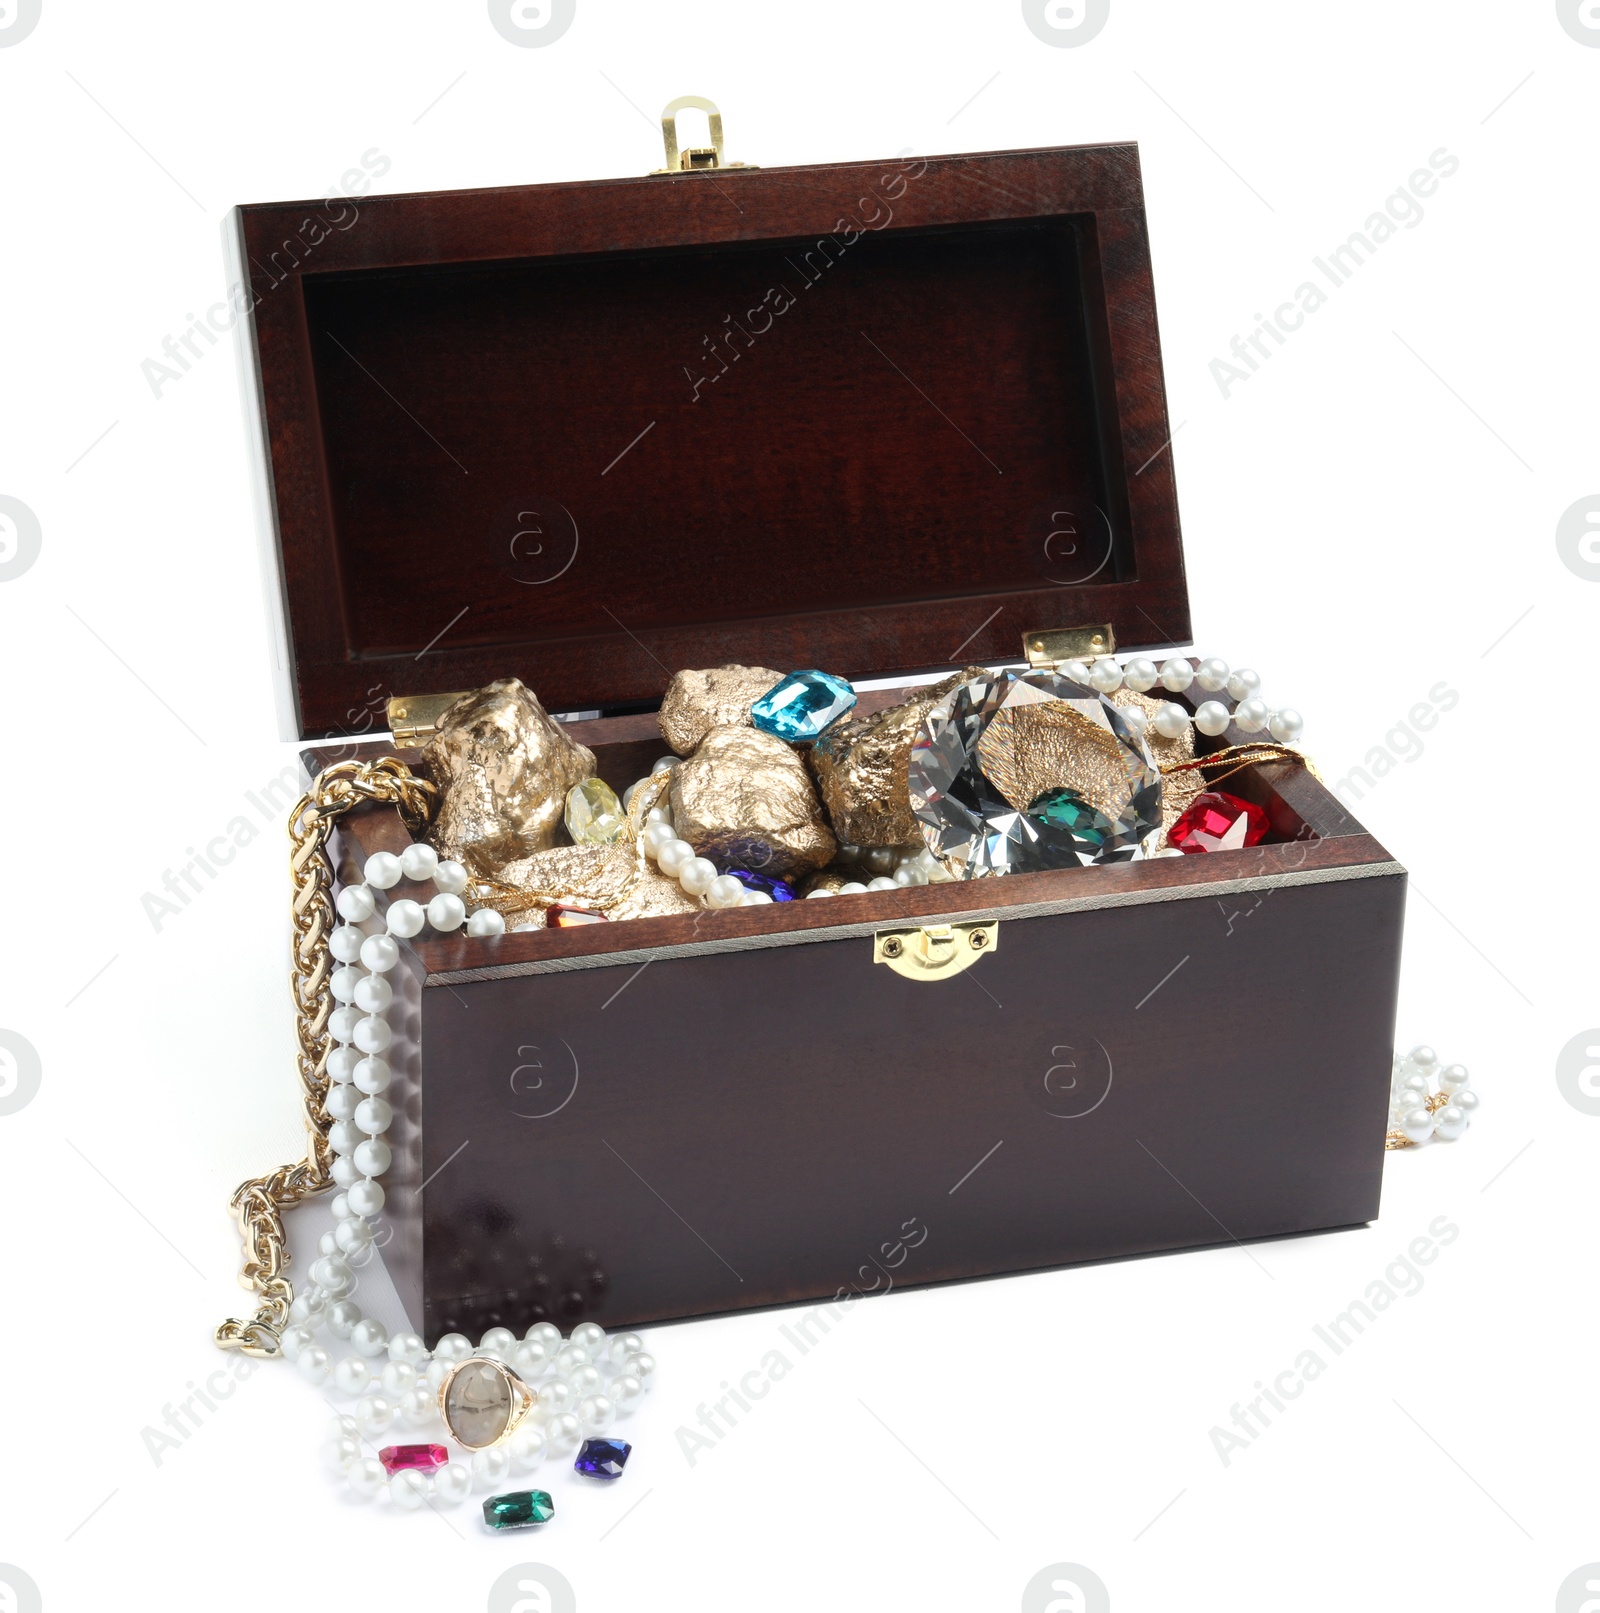 Photo of Wooden chest with treasures isolated on white